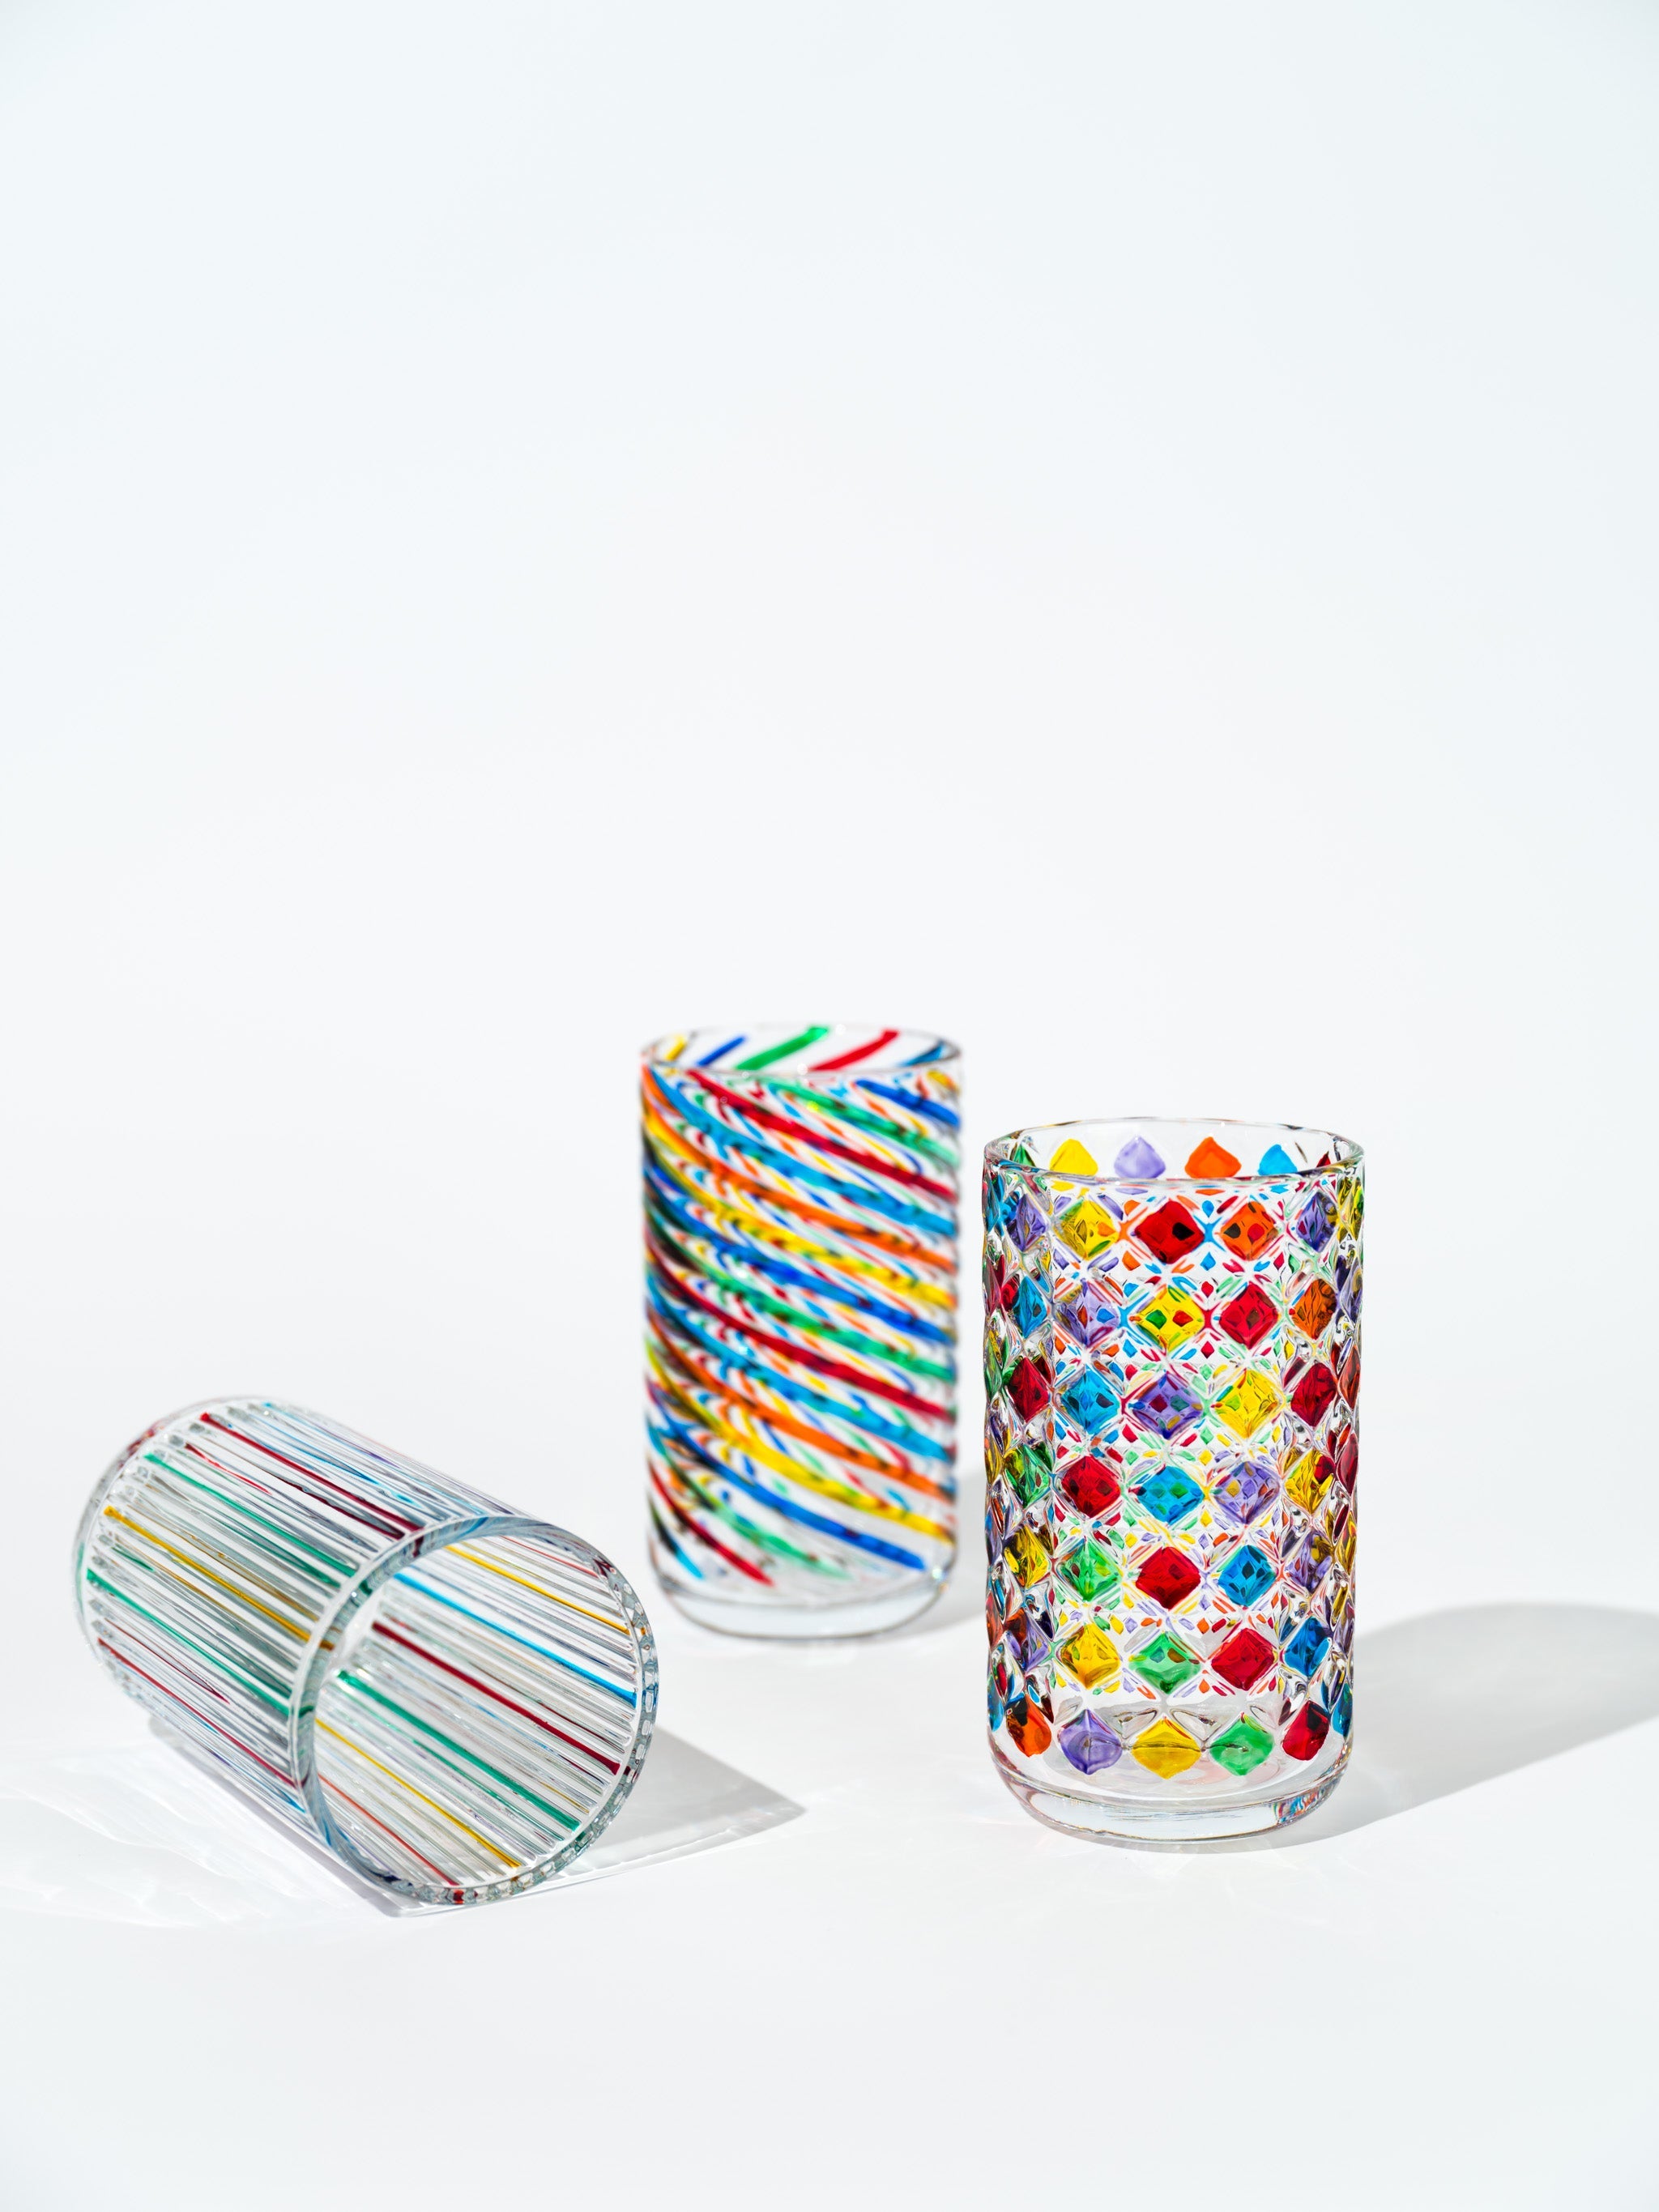 Prismatic Colored Drinking Glass, Strip